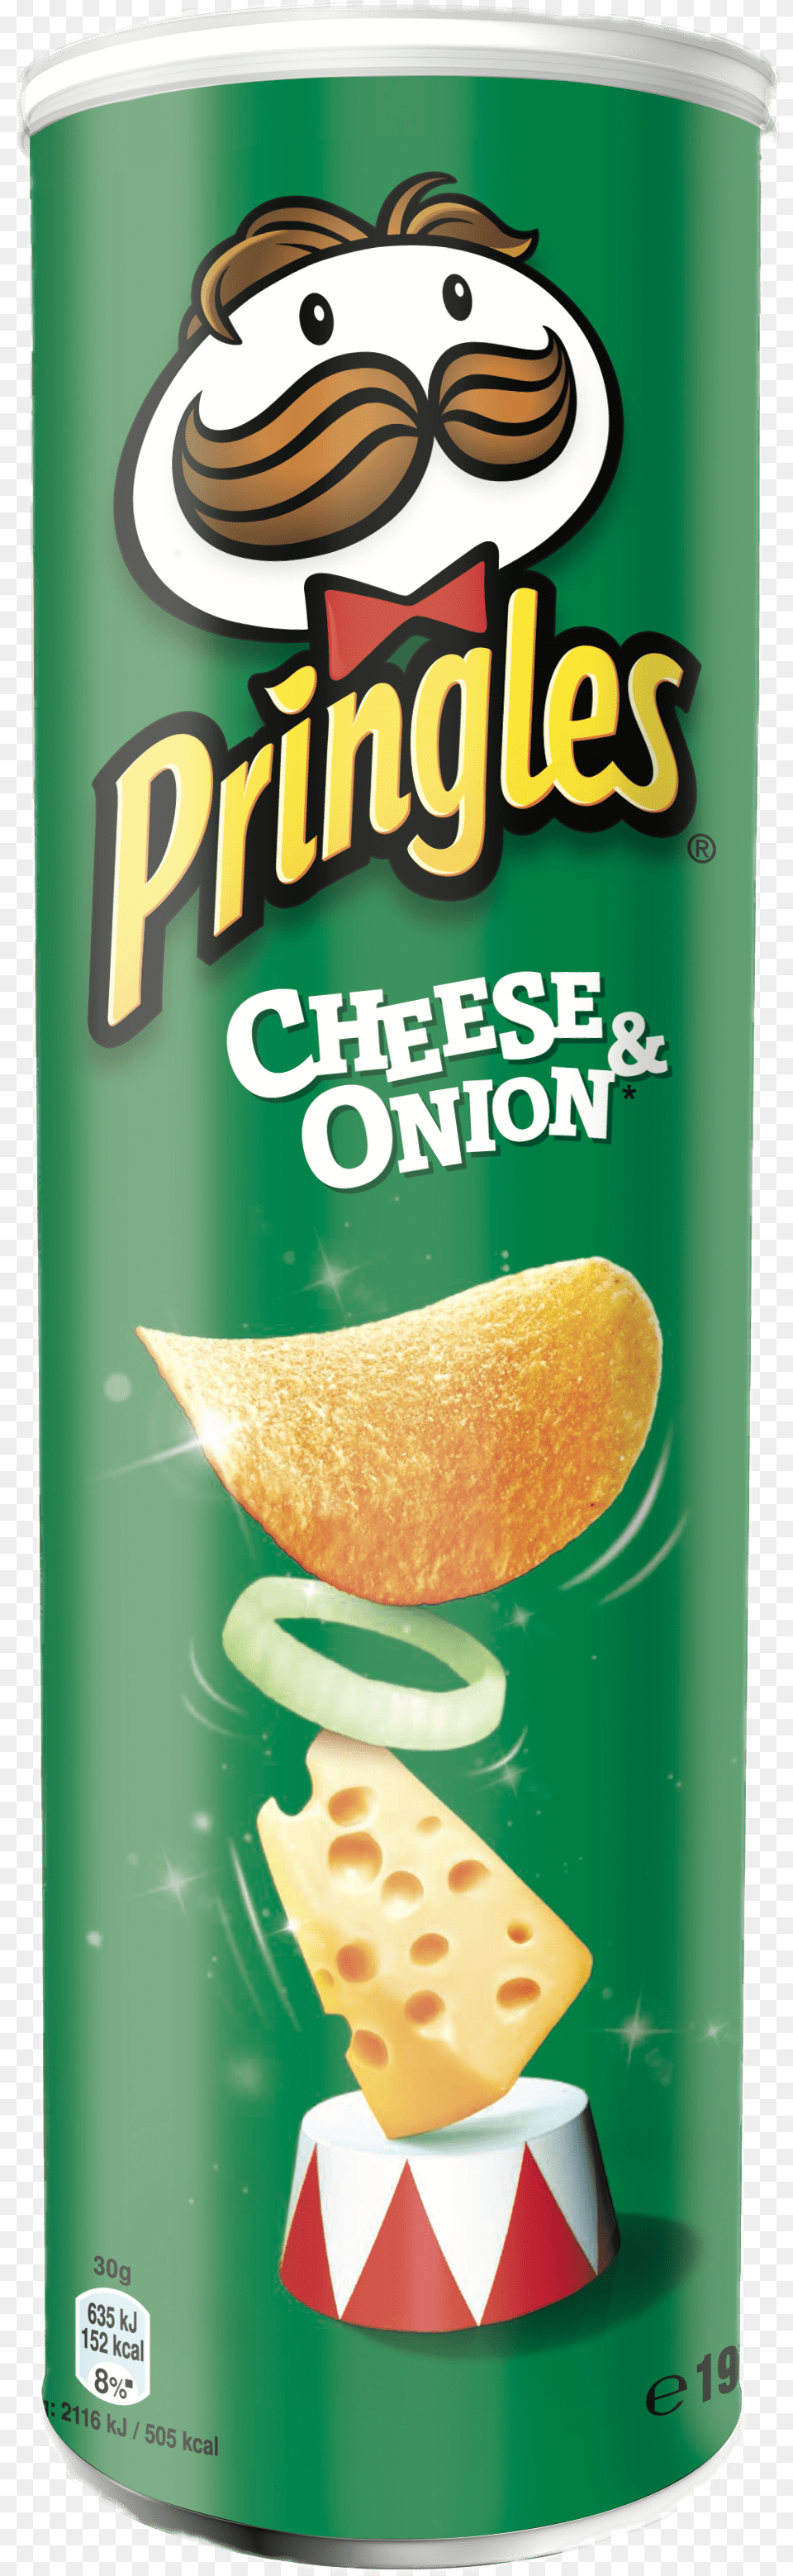 Pringles Cheeseamponions Pringles Texas Bbq Sauce, Can, Tin, Bread, Food Png Image